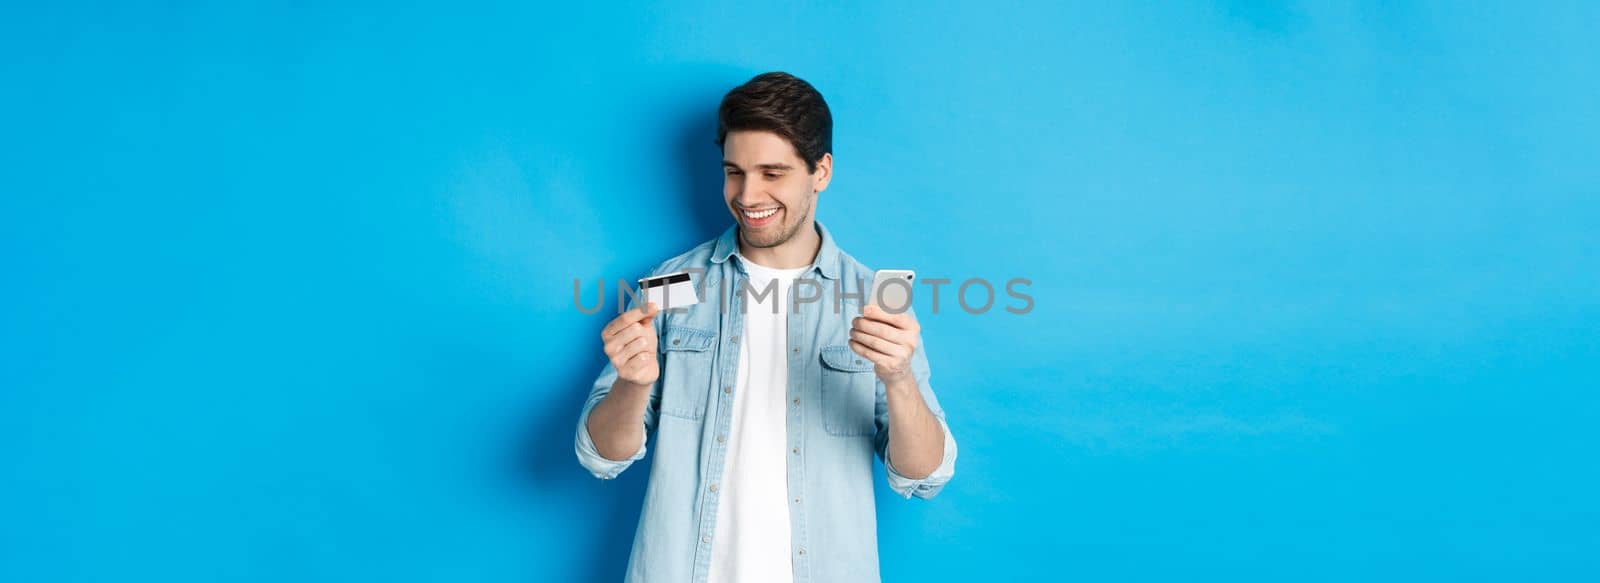 Handsome happy man paying for something online, holding credit card and mobile phone, purchase in internet, standing over blue background.